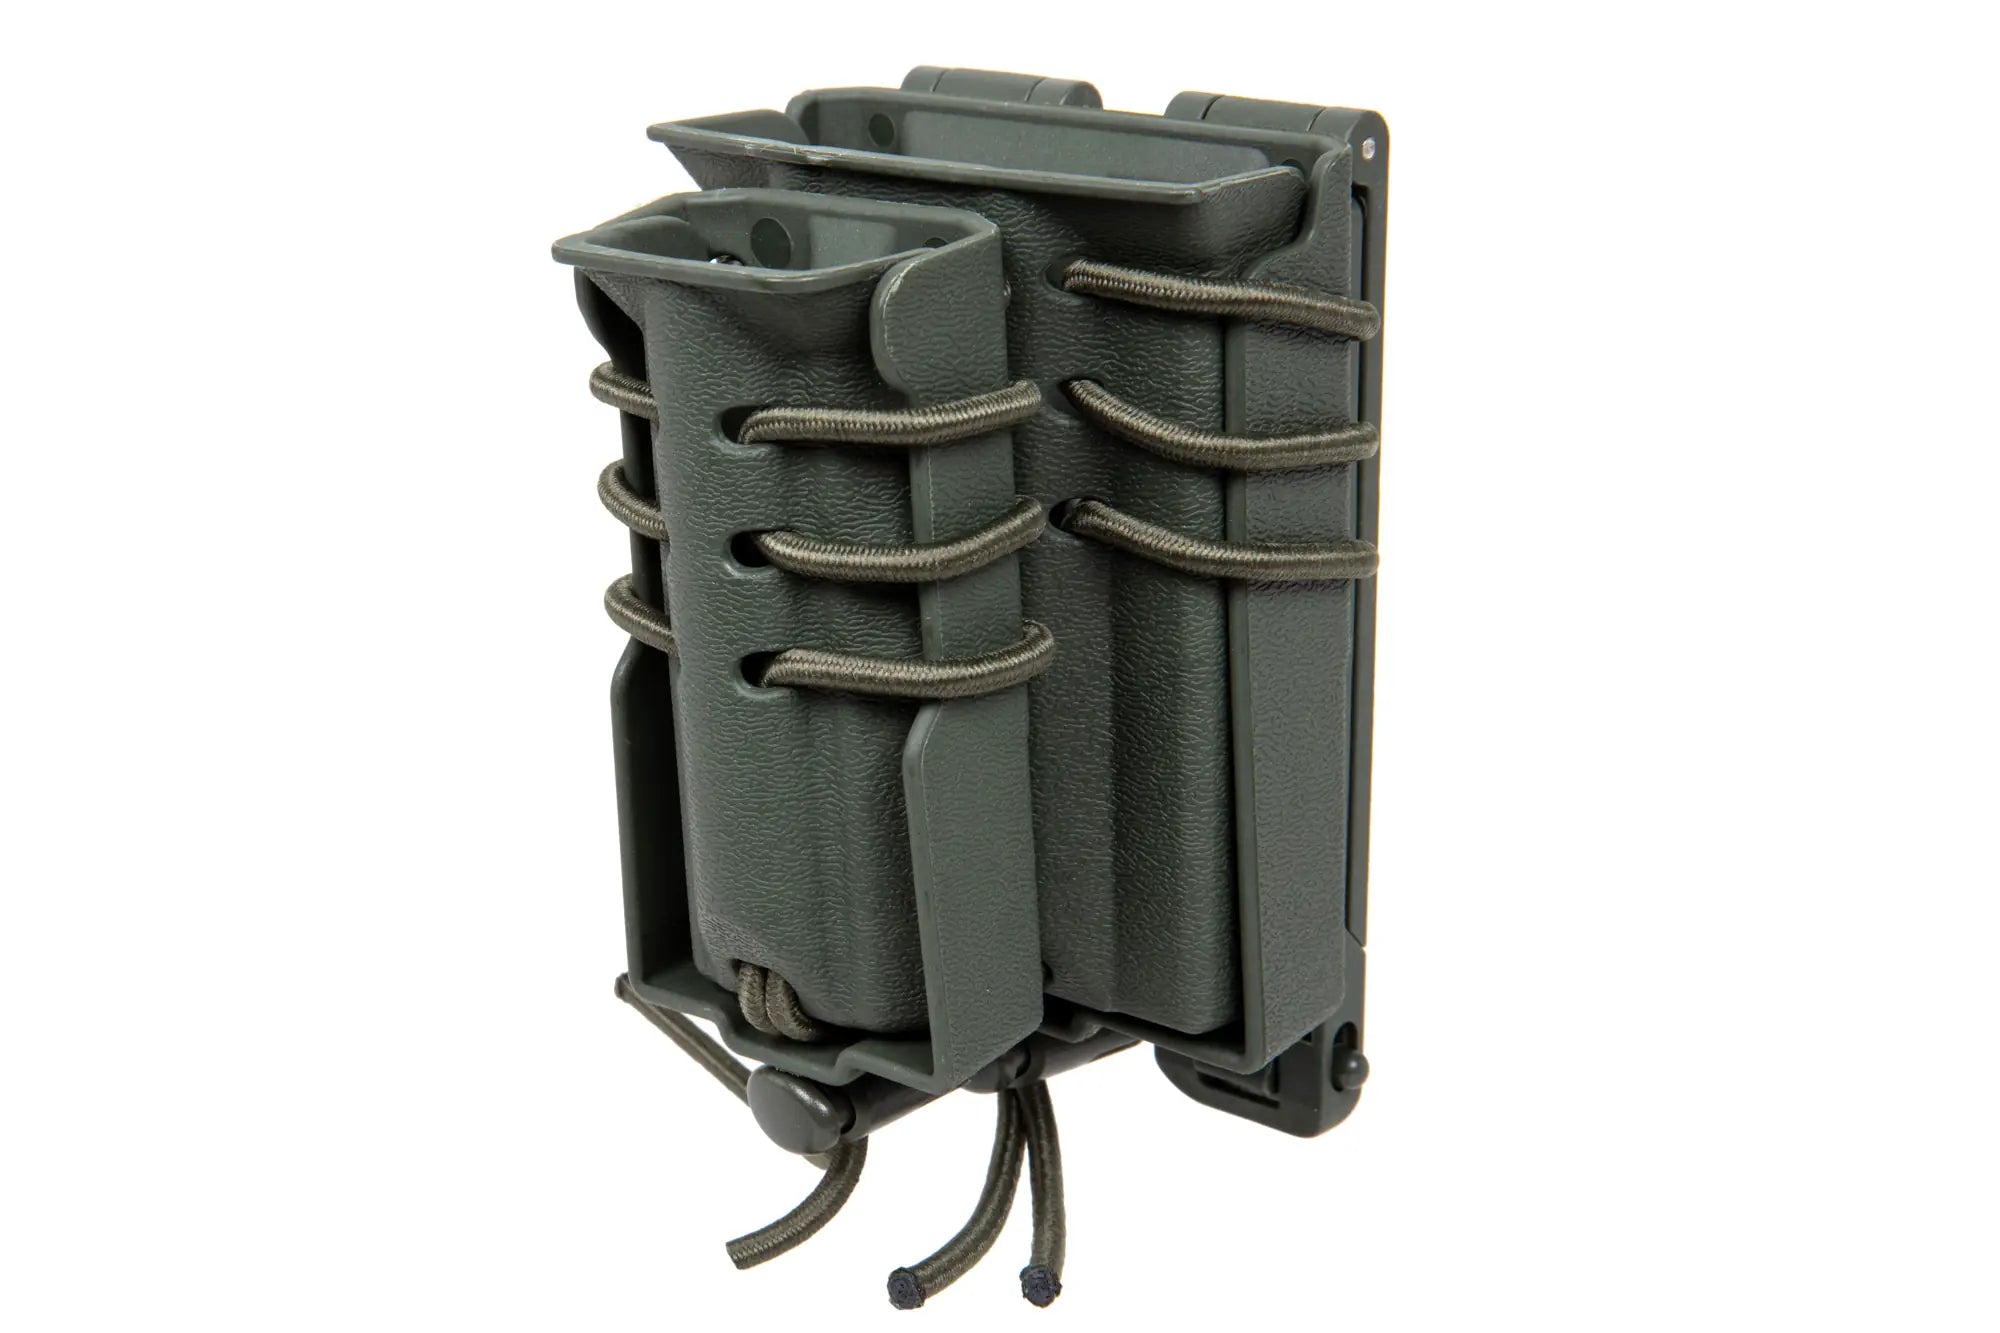 Carrier for 2 M4/M16 and 9mm magazines Wosport Urban Assault Quick Pull Olive-1